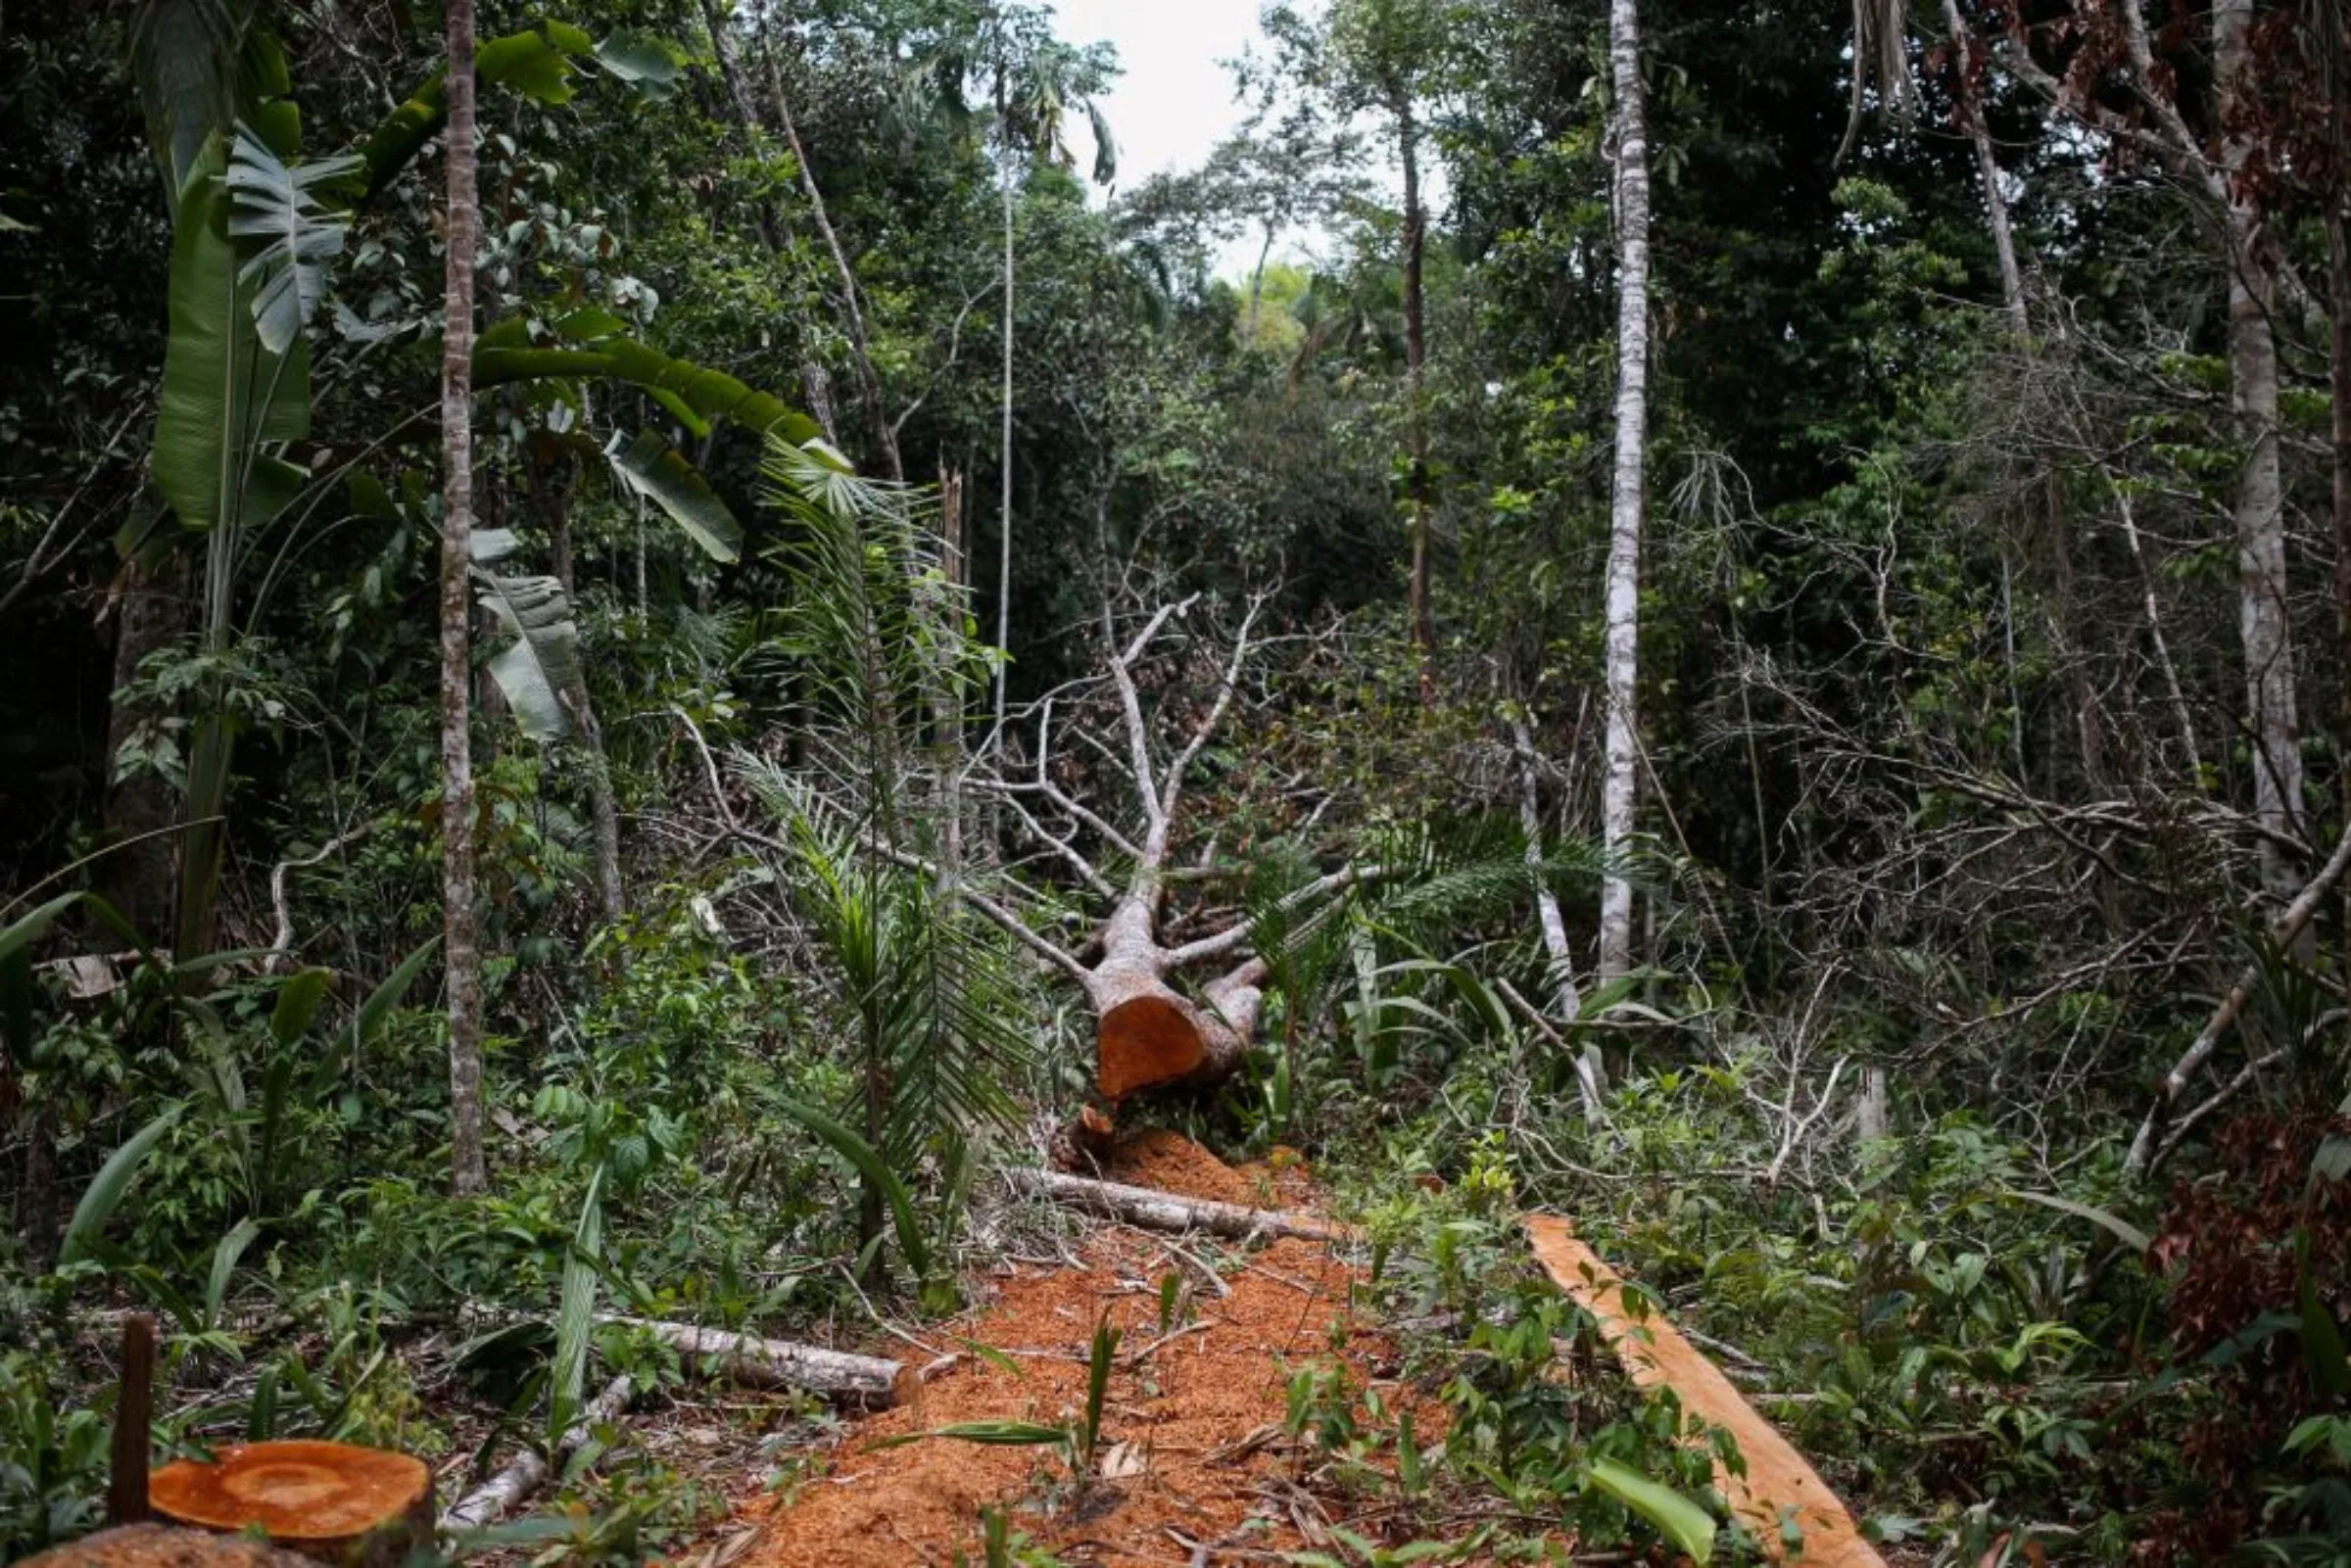 A felled tree is seen in the middle of a deforested area of the Yari plains, in Caqueta, Colombia March 3, 2021. Picture taken March 3, 2021